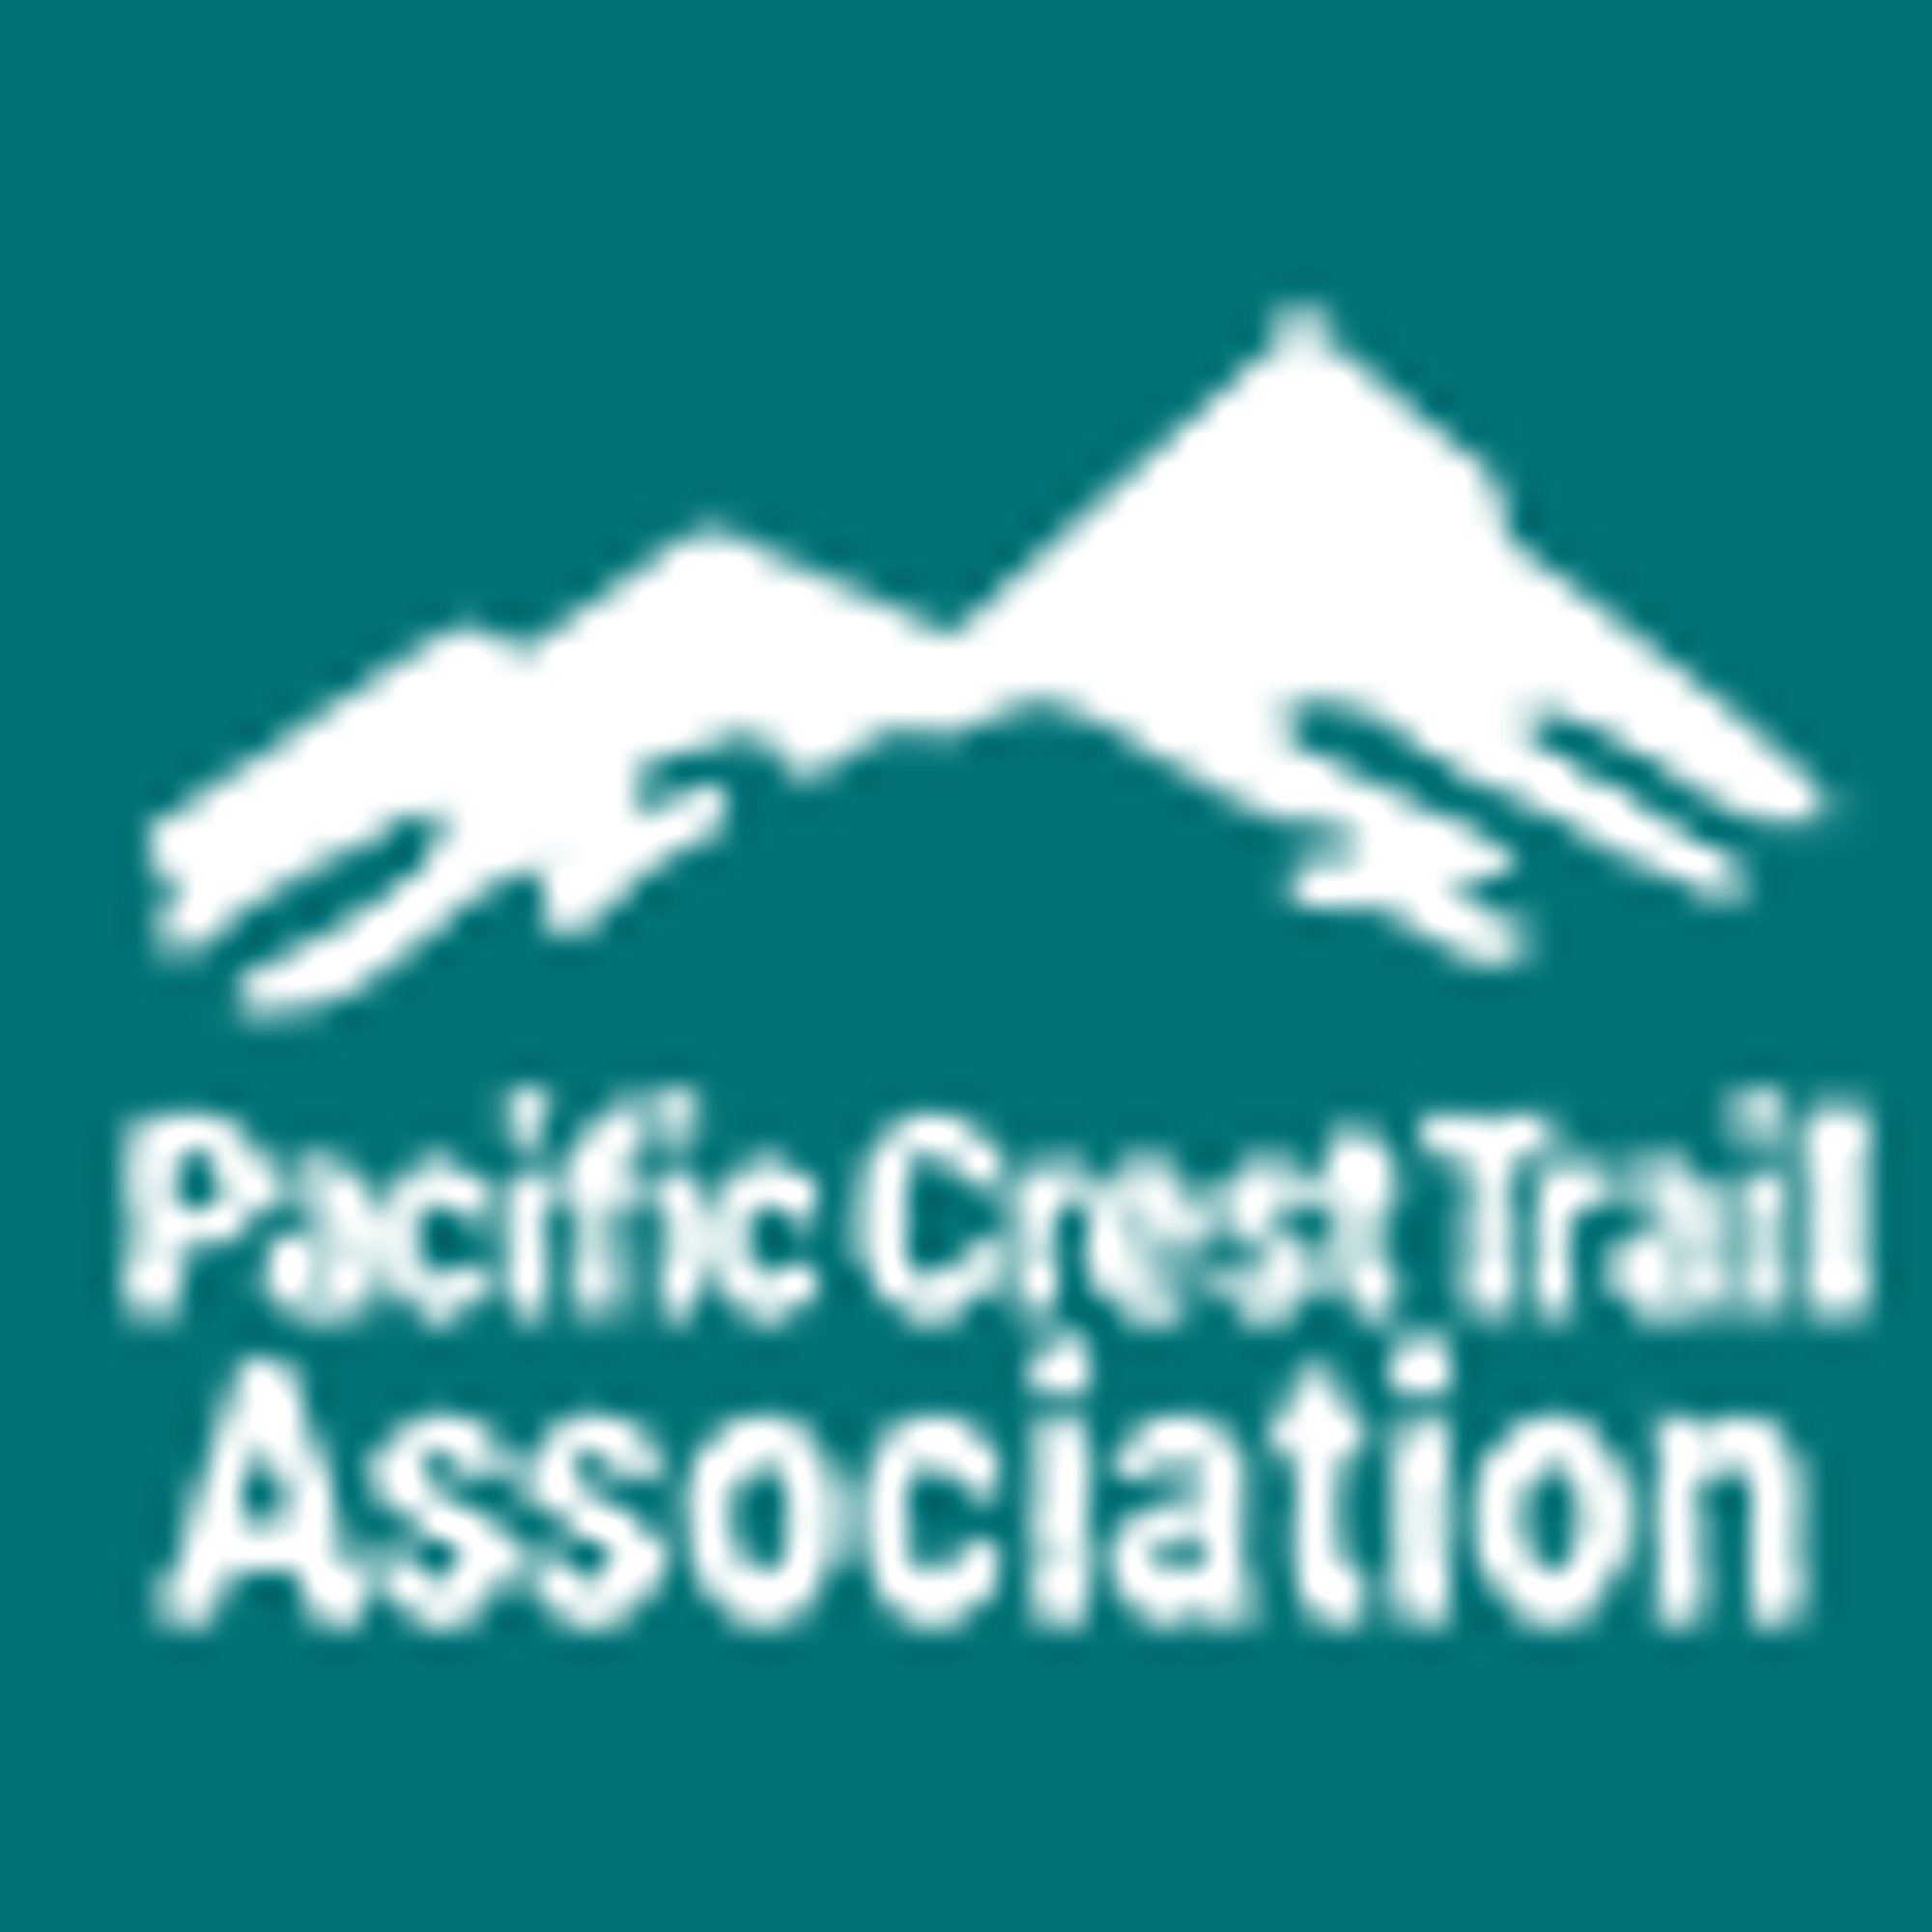 Maps of the Pacific Crest Trail